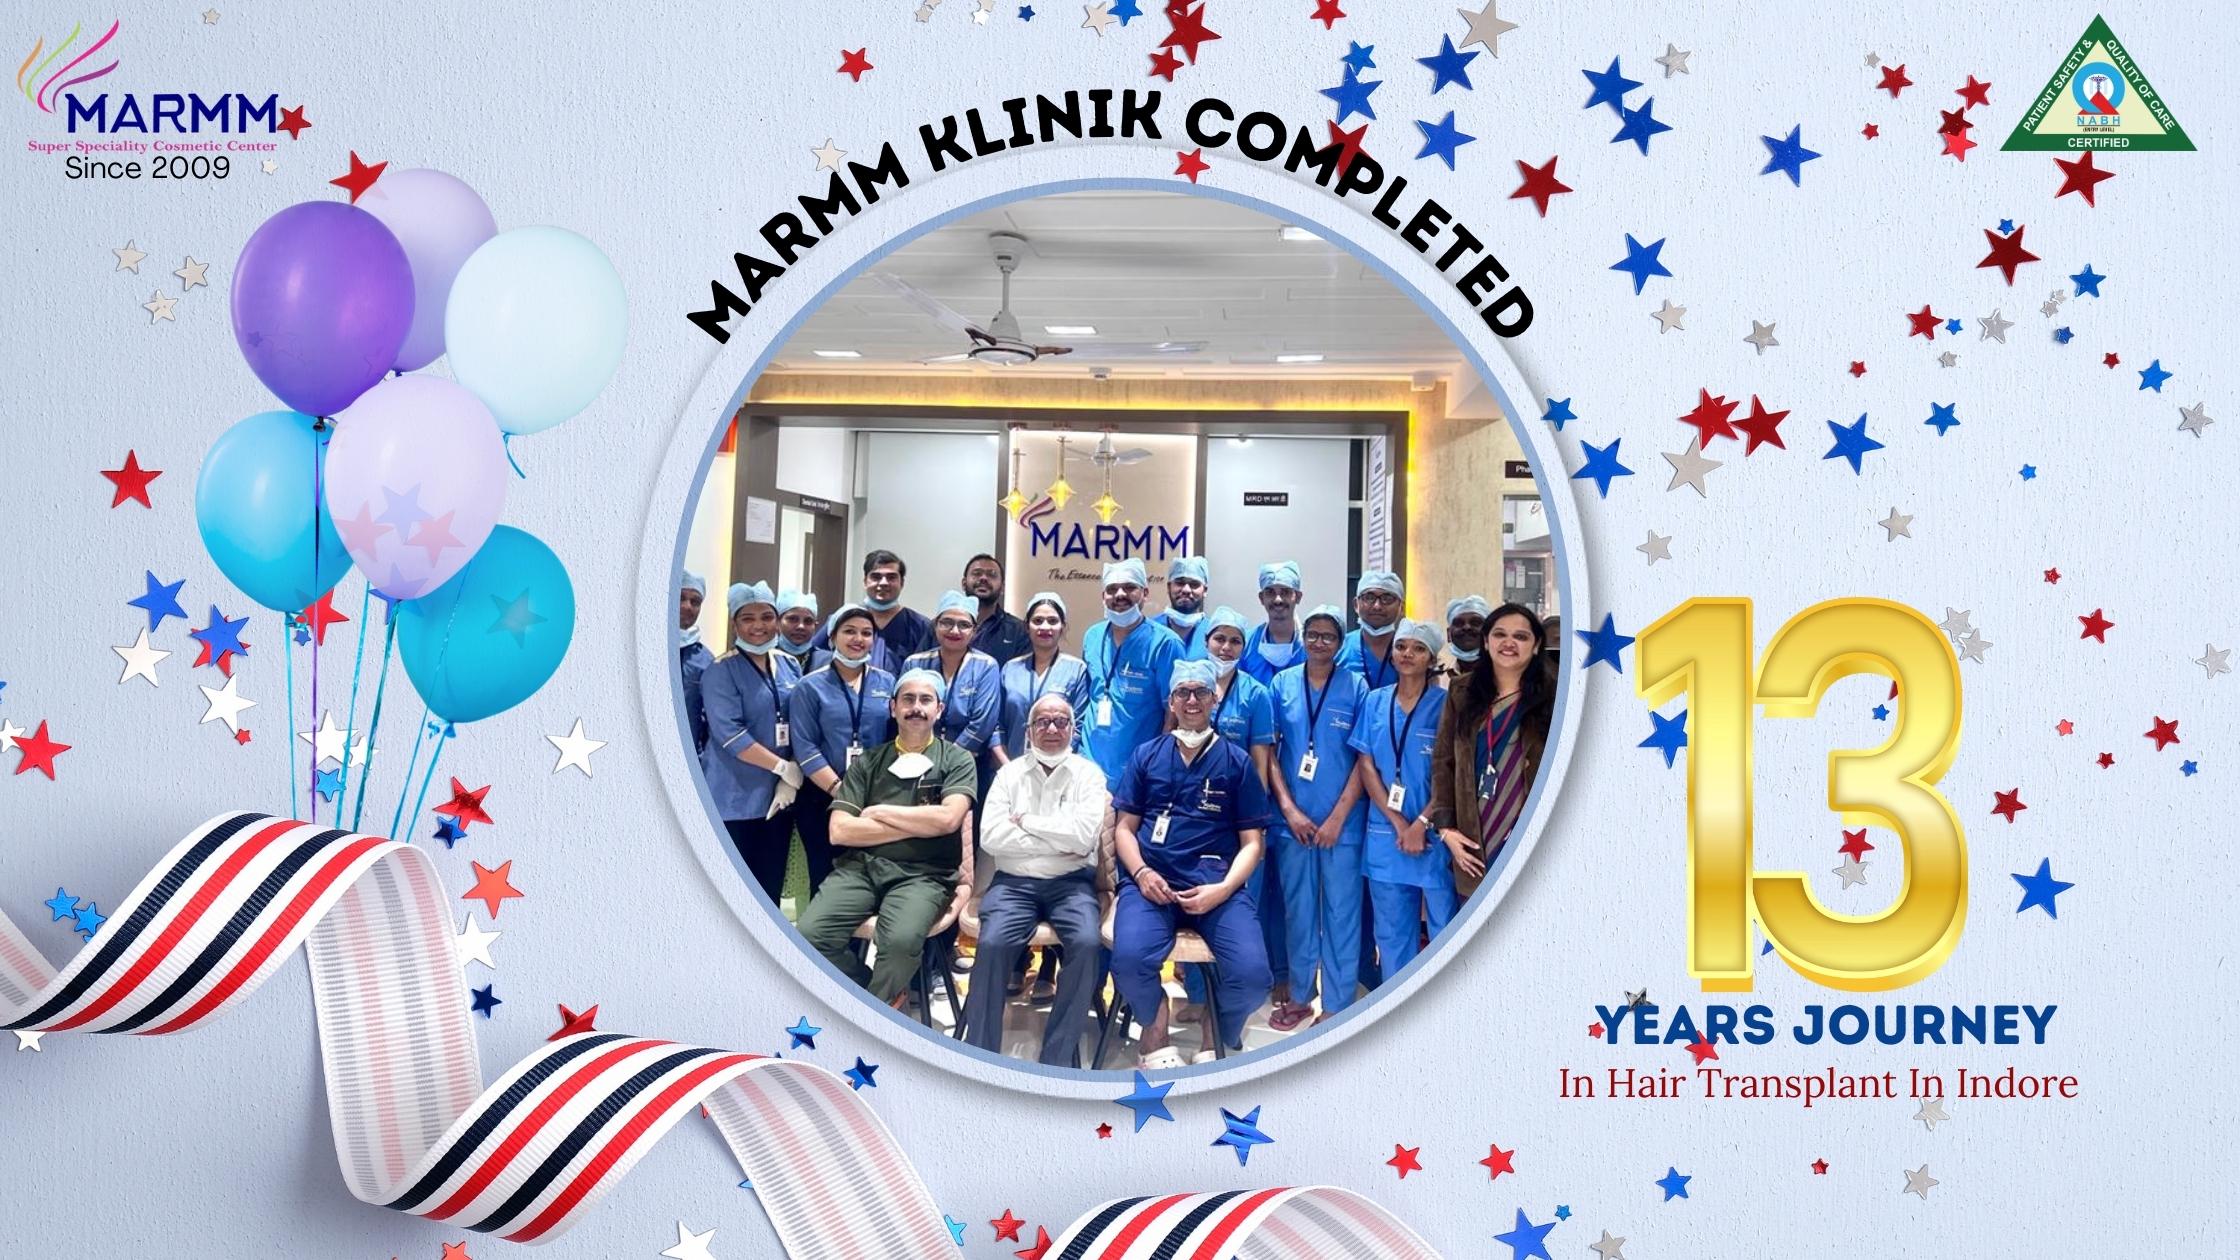 Marmm Klinik Completed 13 Years Journey In Hair Transplant In Indore